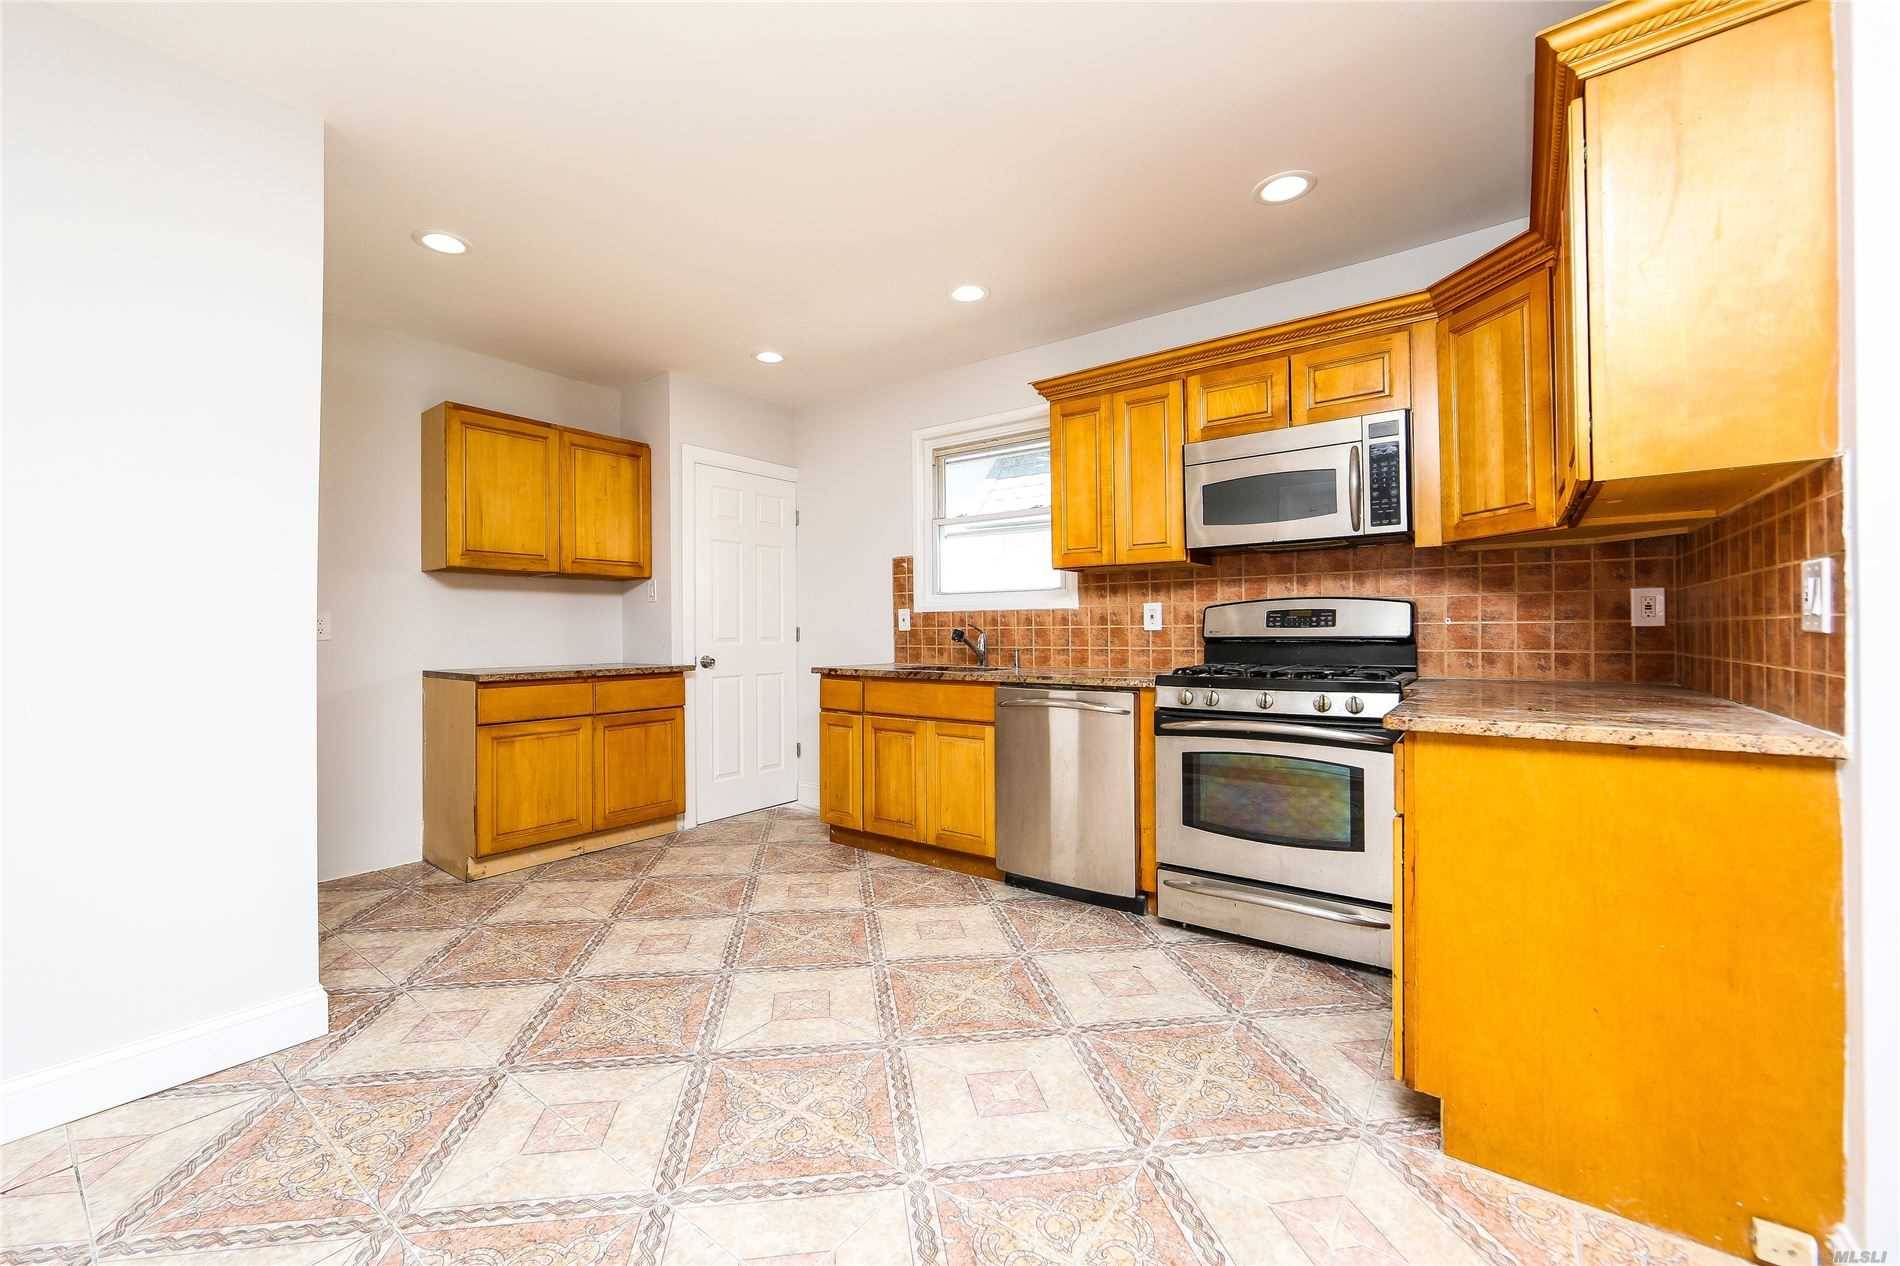 just bring your things live in this newly renovated single family townhouse featuring a wide private driveway Garage.